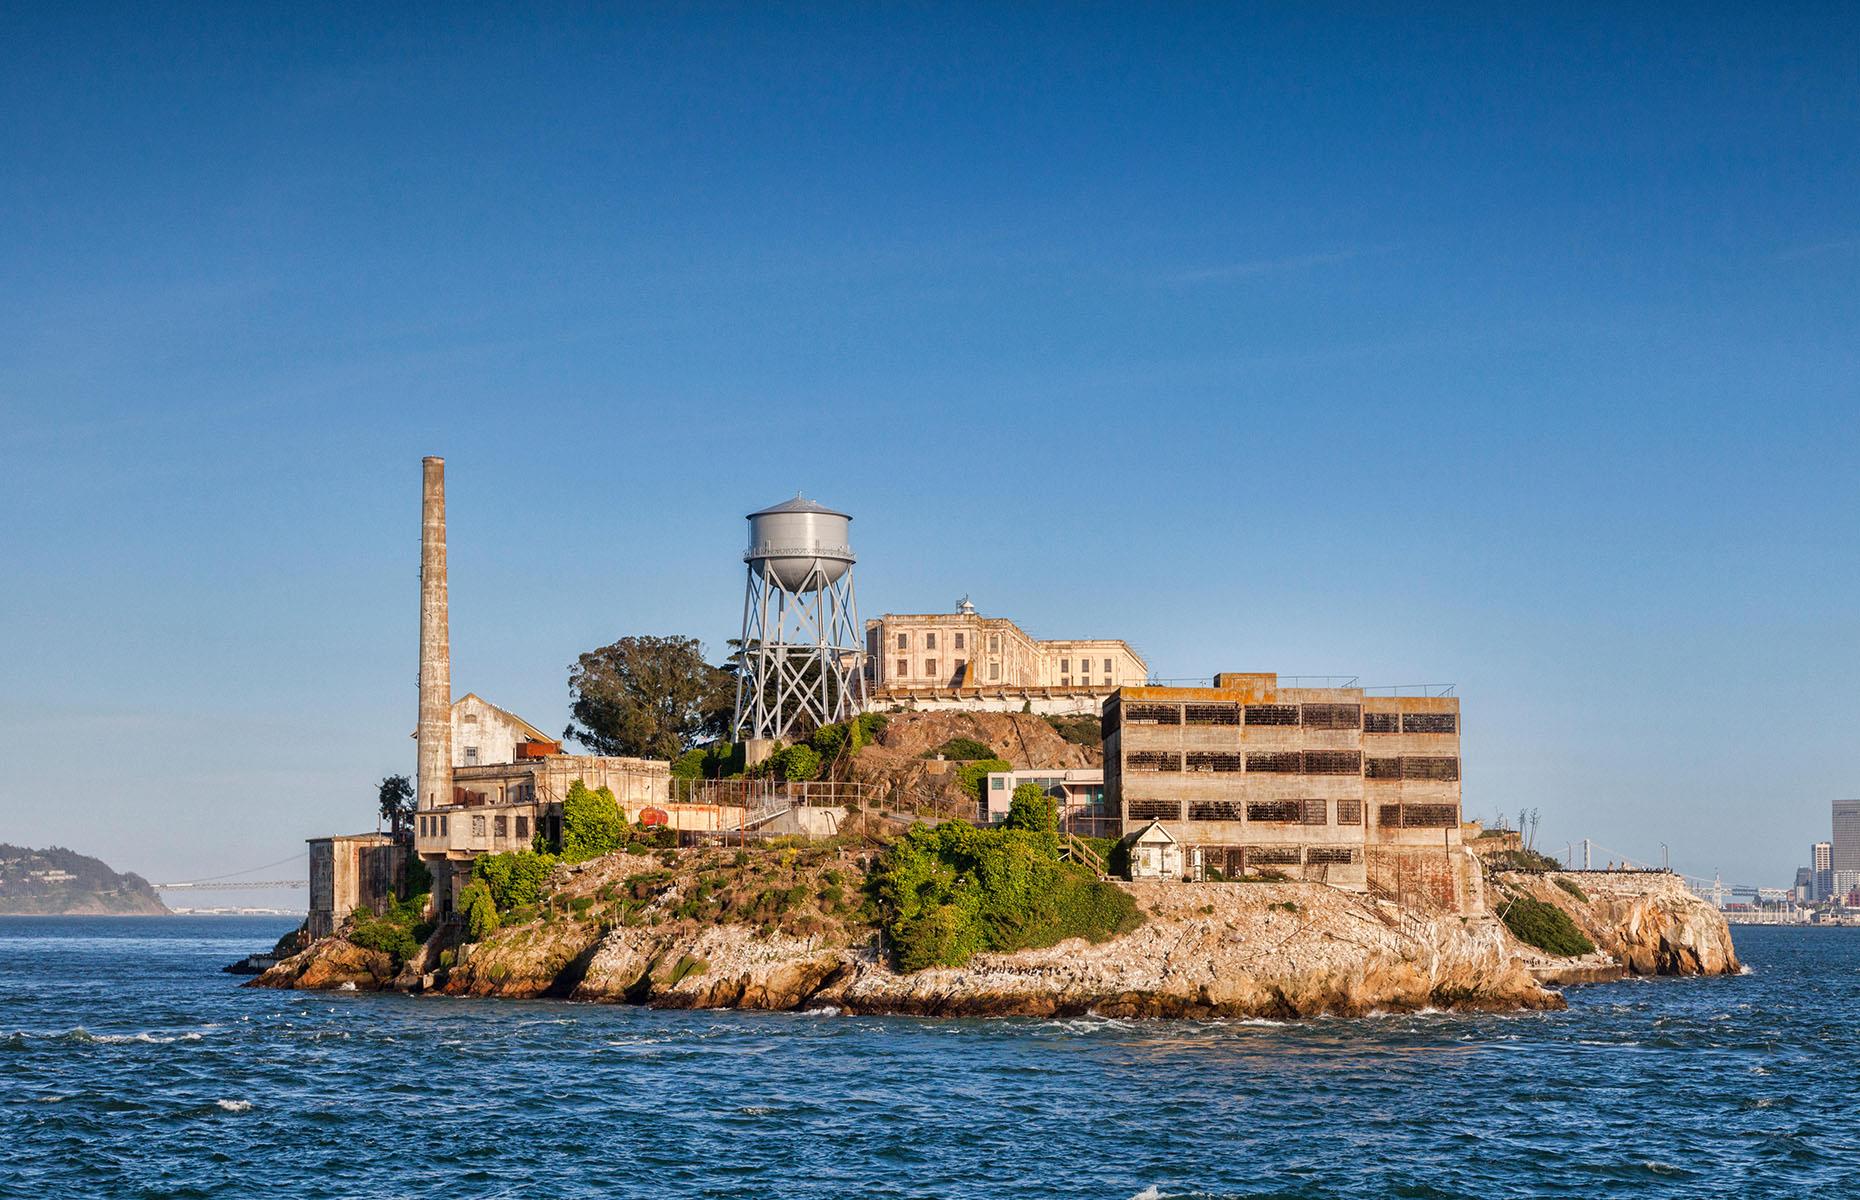 <p>Spending decades as America's most formidable prison – and now serving as a mysterious tourist attraction – Alcatraz has captured popular imagination for more than a century. But how much do you know about its checkered history?</p>  <p><strong>Click through this gallery to learn the site's mysterious story, from its origins as a military fort, through its time housing America's most dangerous criminals, to its modern-day status as one of the country's most beguiling abandoned places...</strong></p>